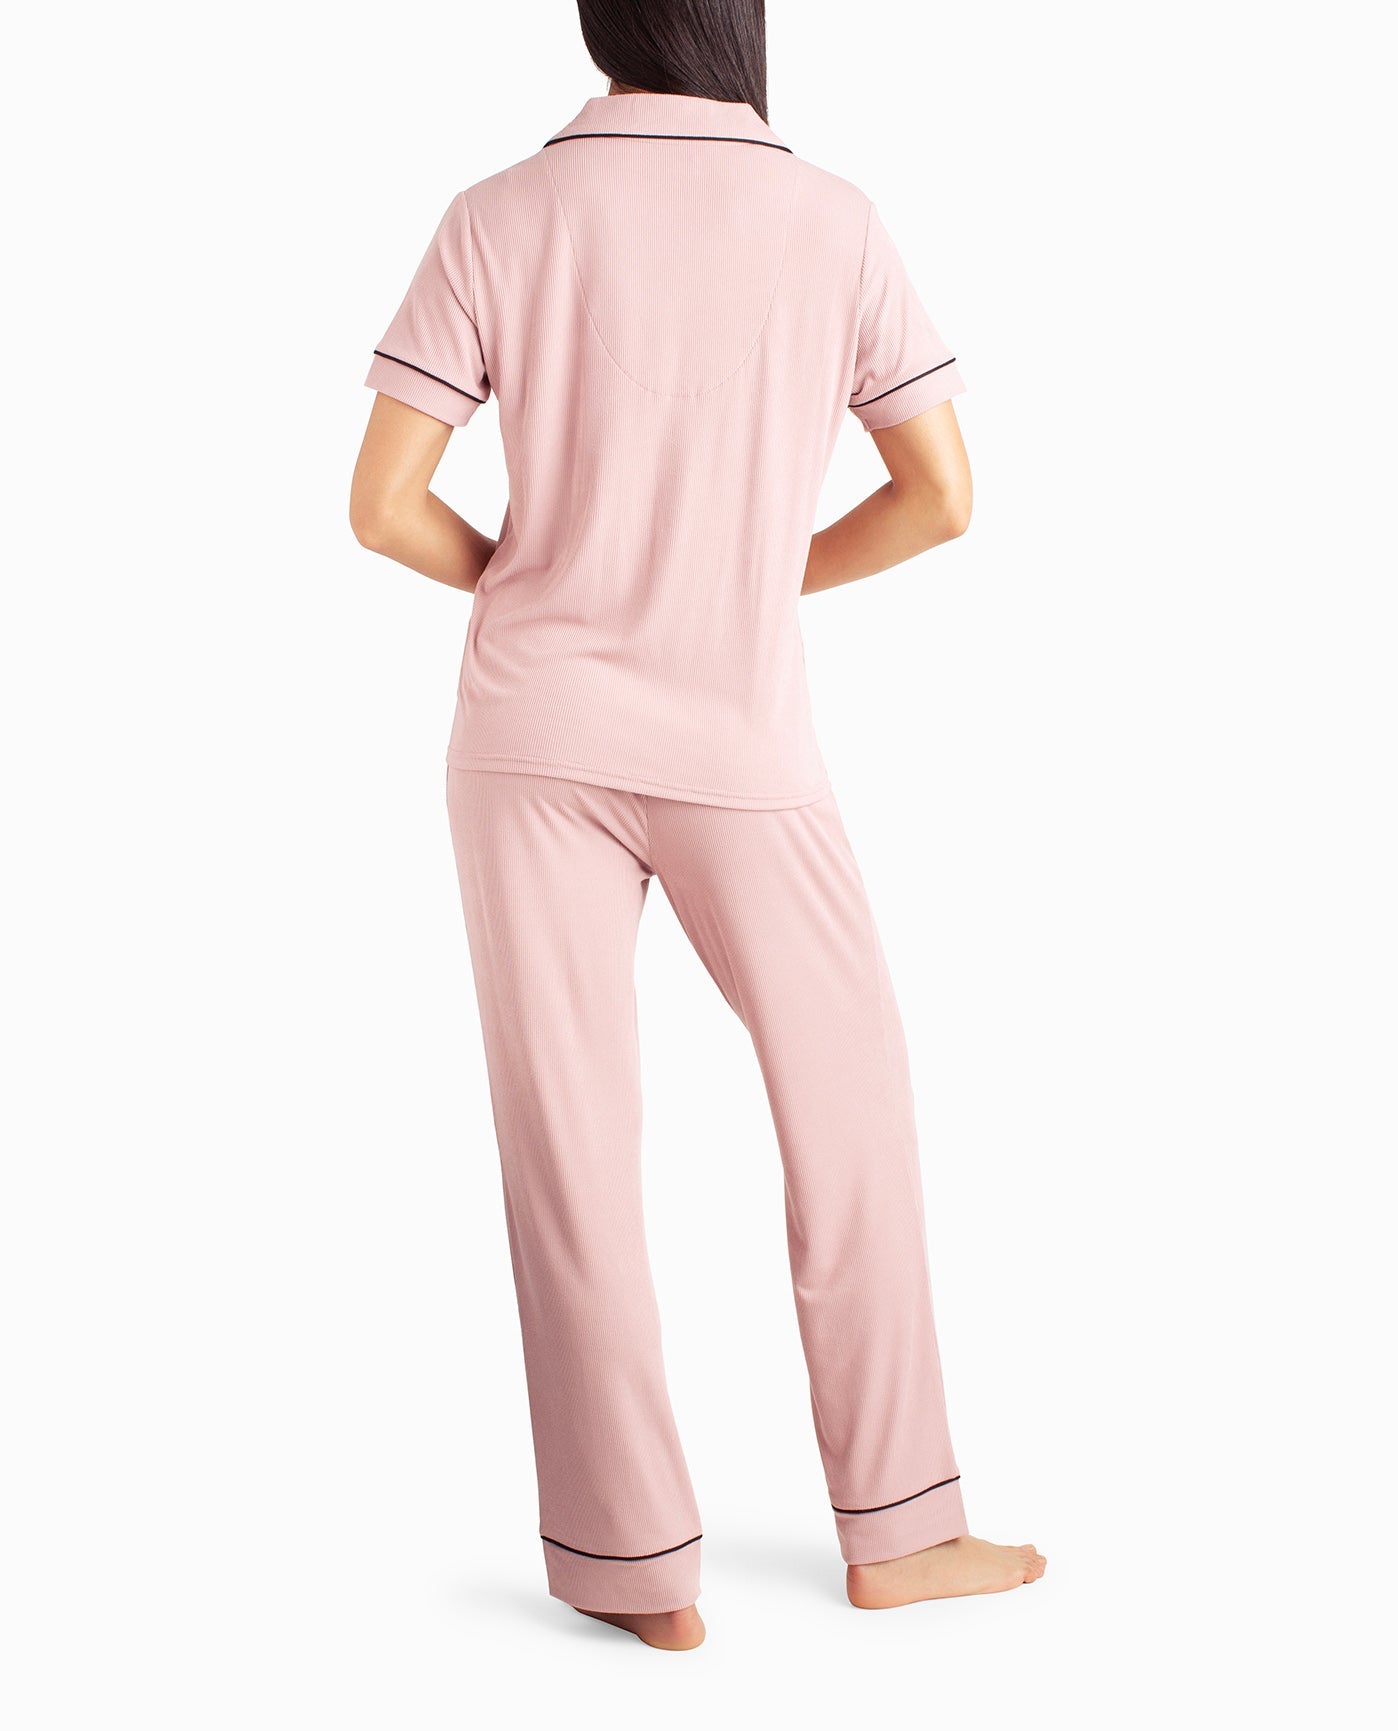 BACK OF RIBBED SHIRT AND PANT TWO-PIECE SLEEPWEAR SET | Gemini